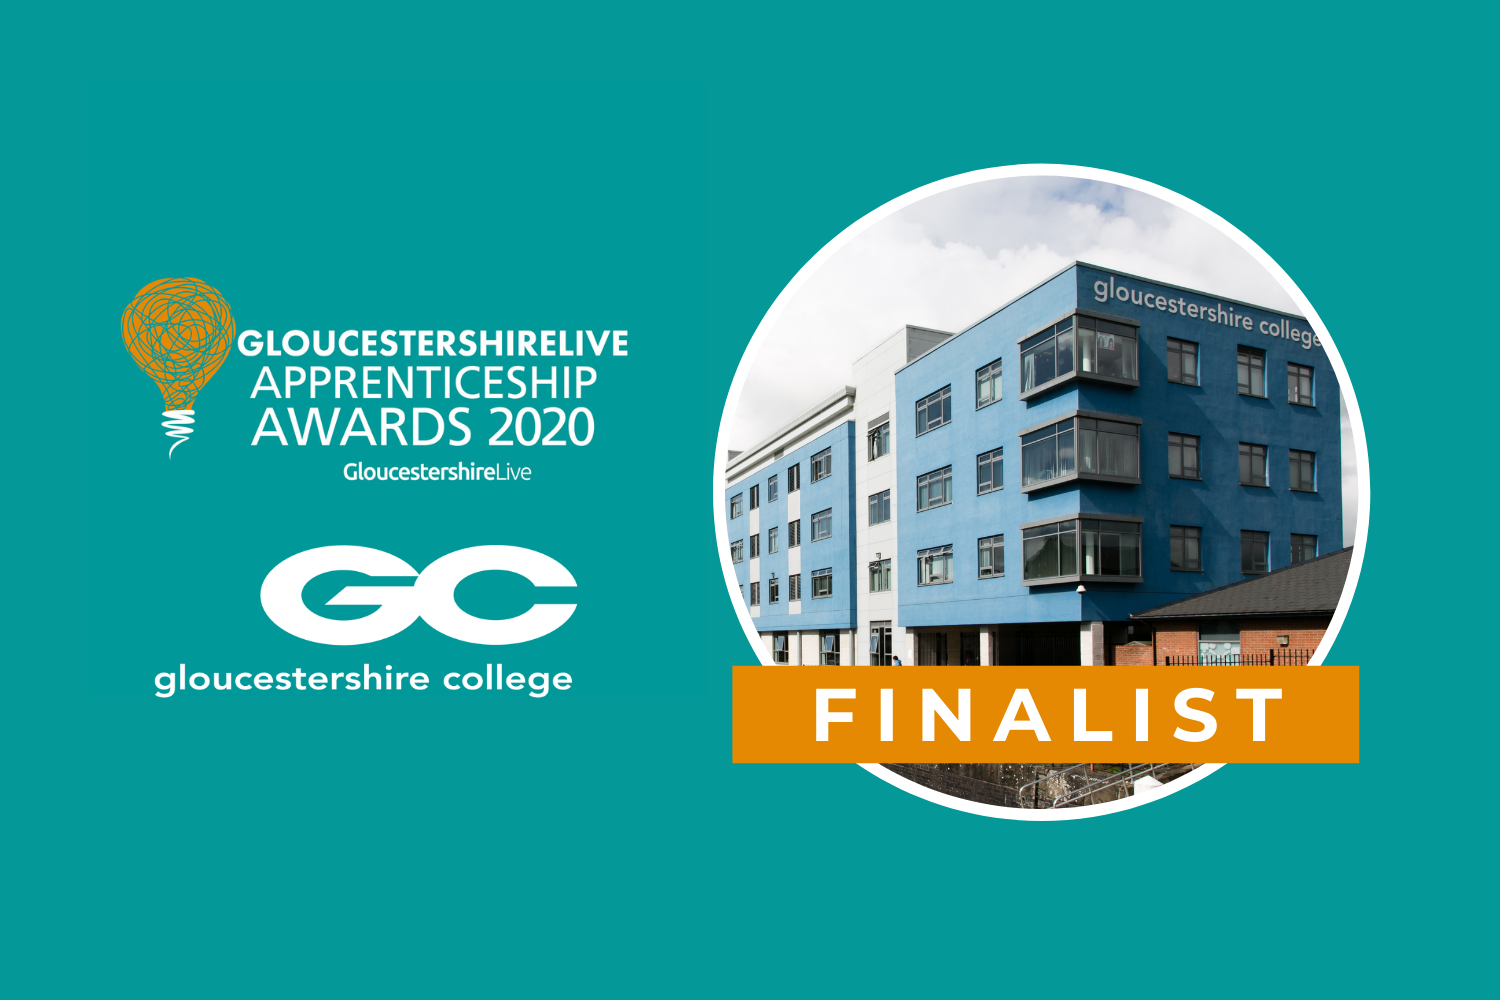 Gloucestershire College is a proud finalist for Apprenticeship Training Provider of the Year 2020